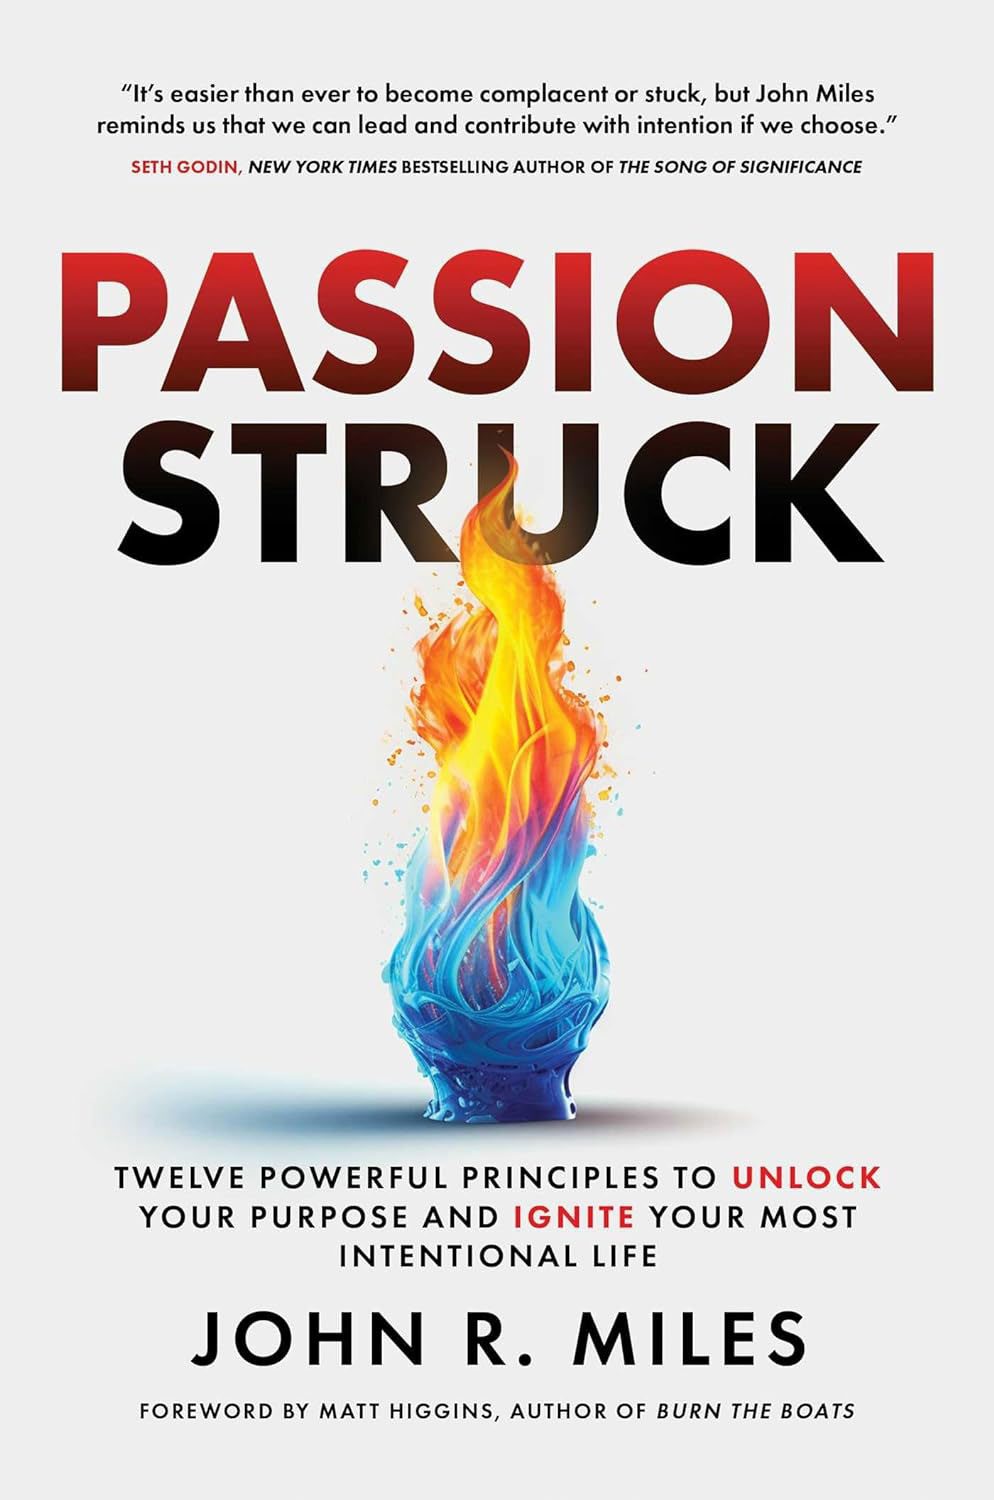 Passion Struck: Twelve Powerful Principles to Unlock Your Purpose and Ignite Your Most Intentional Life